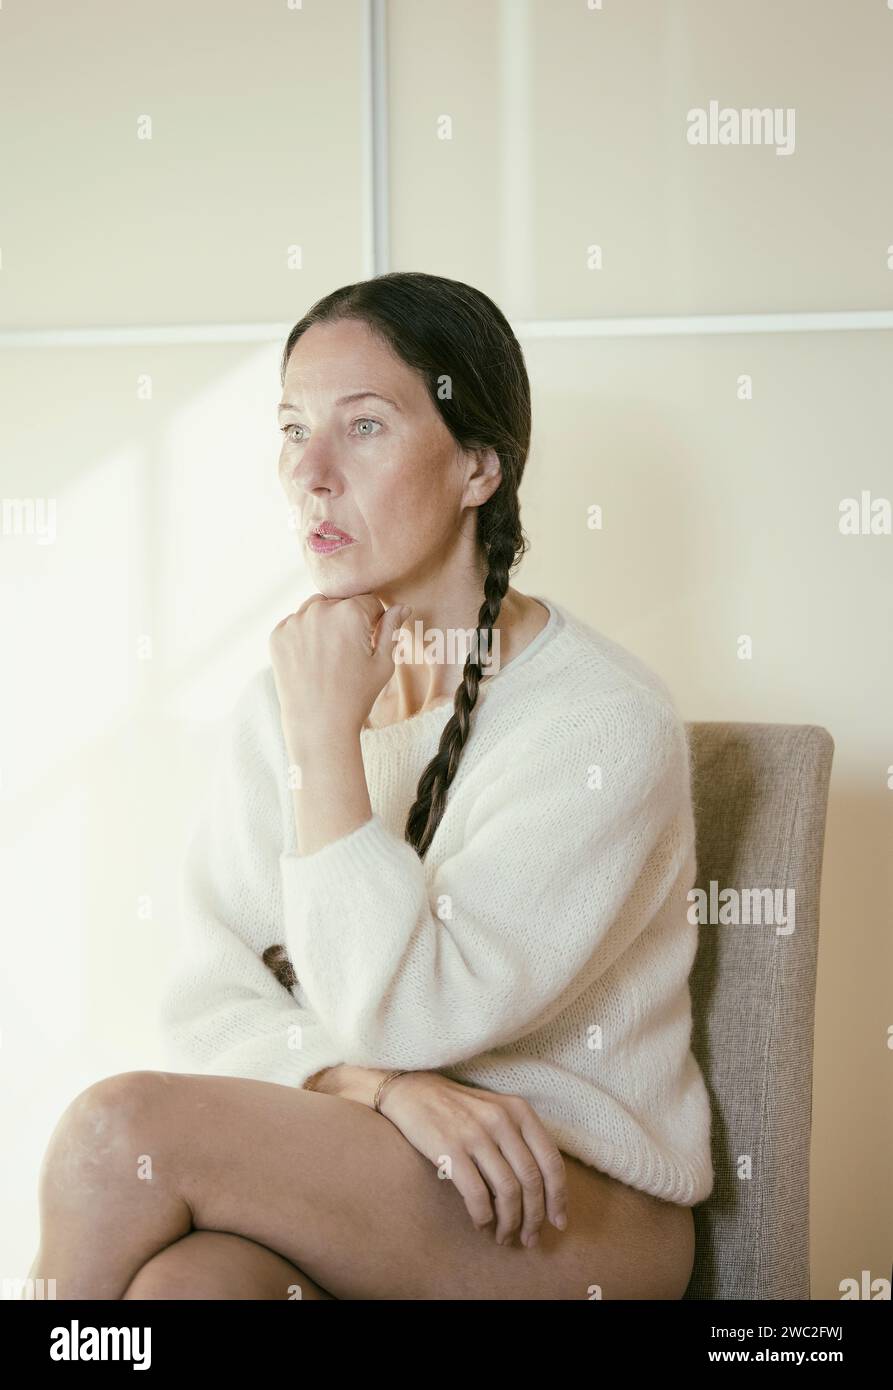 woman sitting on a chair with white wool sweater in thoughtful attitude, france Stock Photo